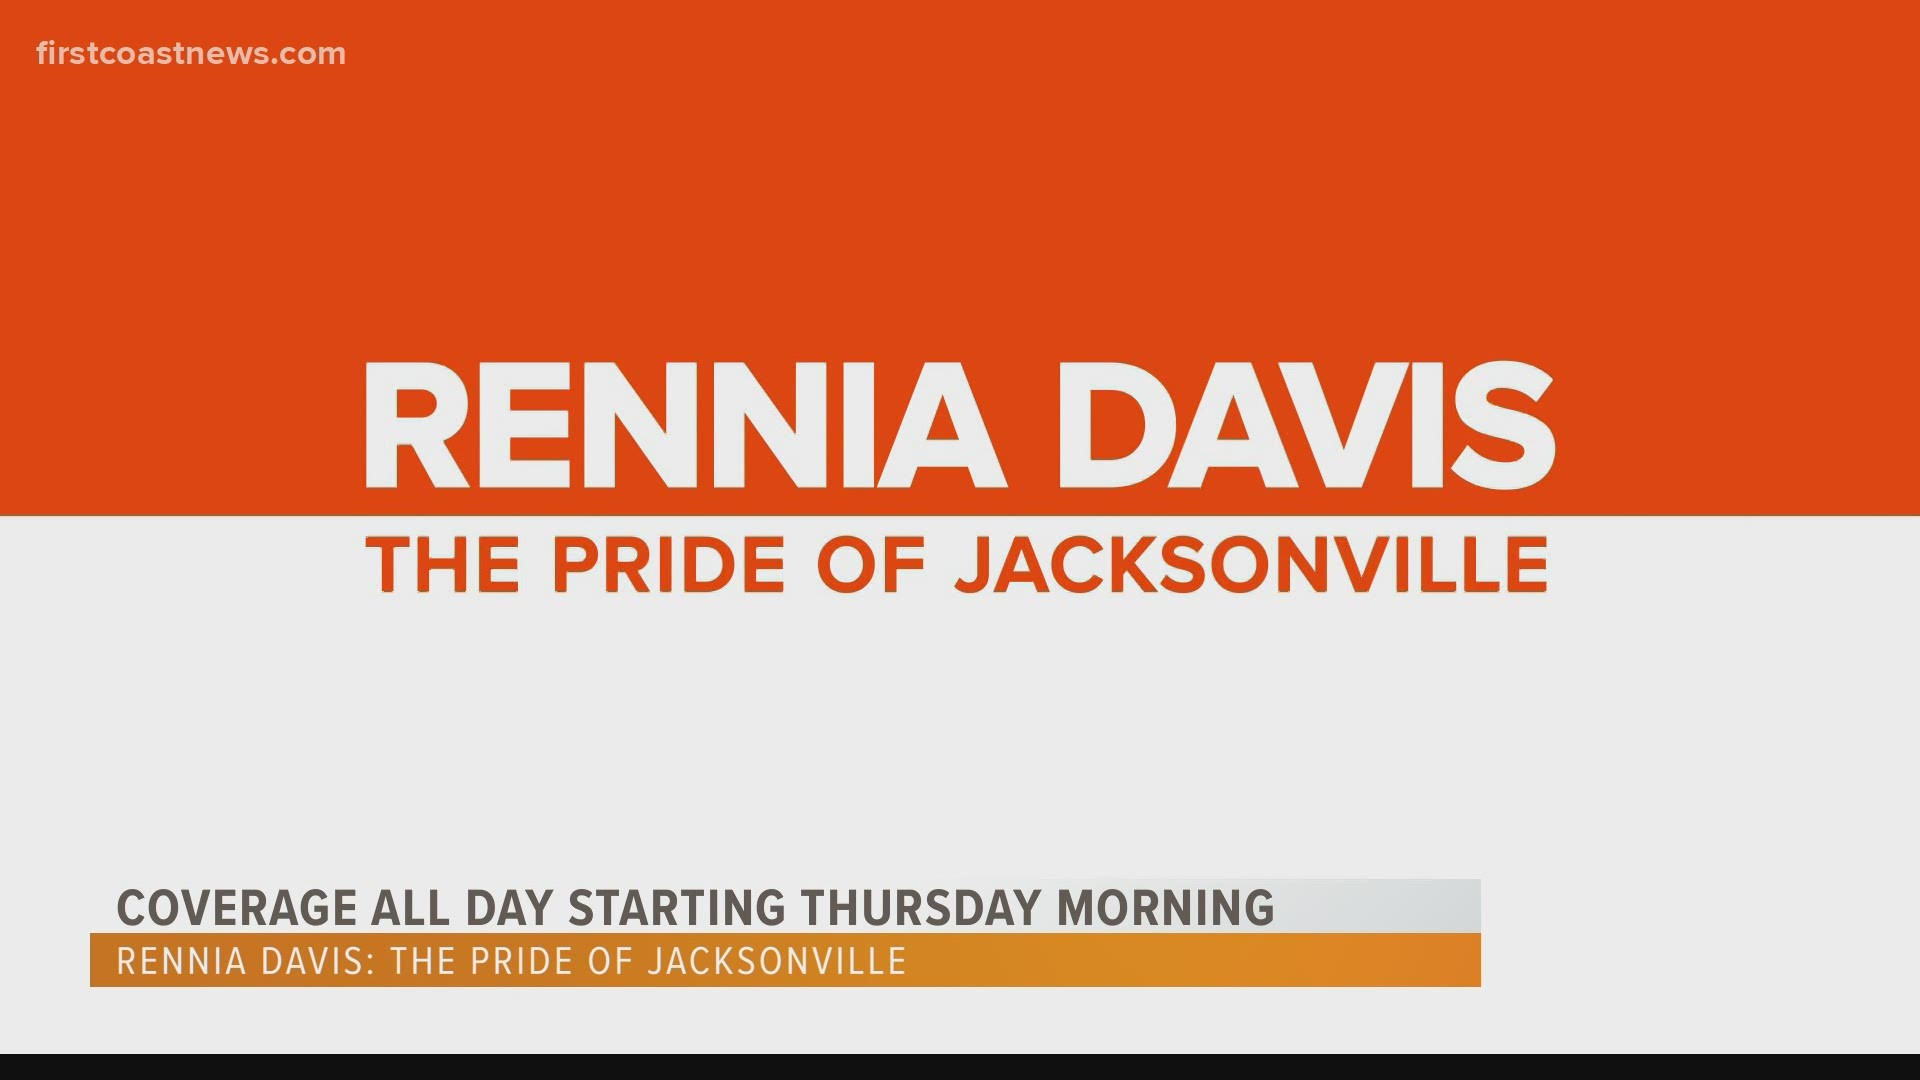 First Coast Sports is bringing you the latest on Rennia Davis, the pride of Jacksonville.